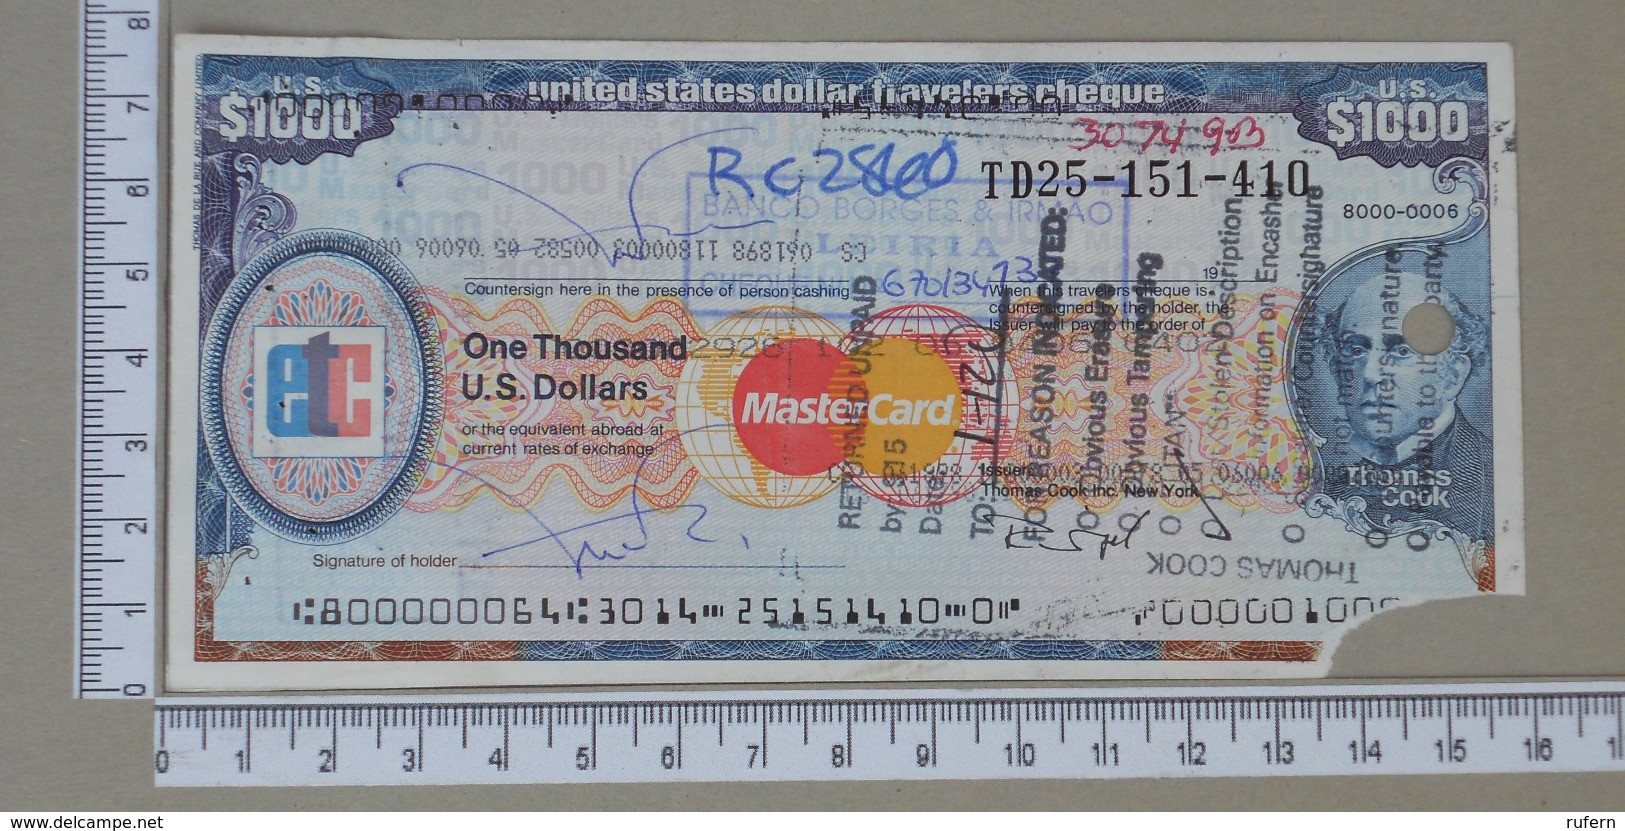 USA 1000 DOLLARS  - TRAVELERS CHEQUE MASTER CARD    - (Nº18168) - Cheques & Traveler's Cheques